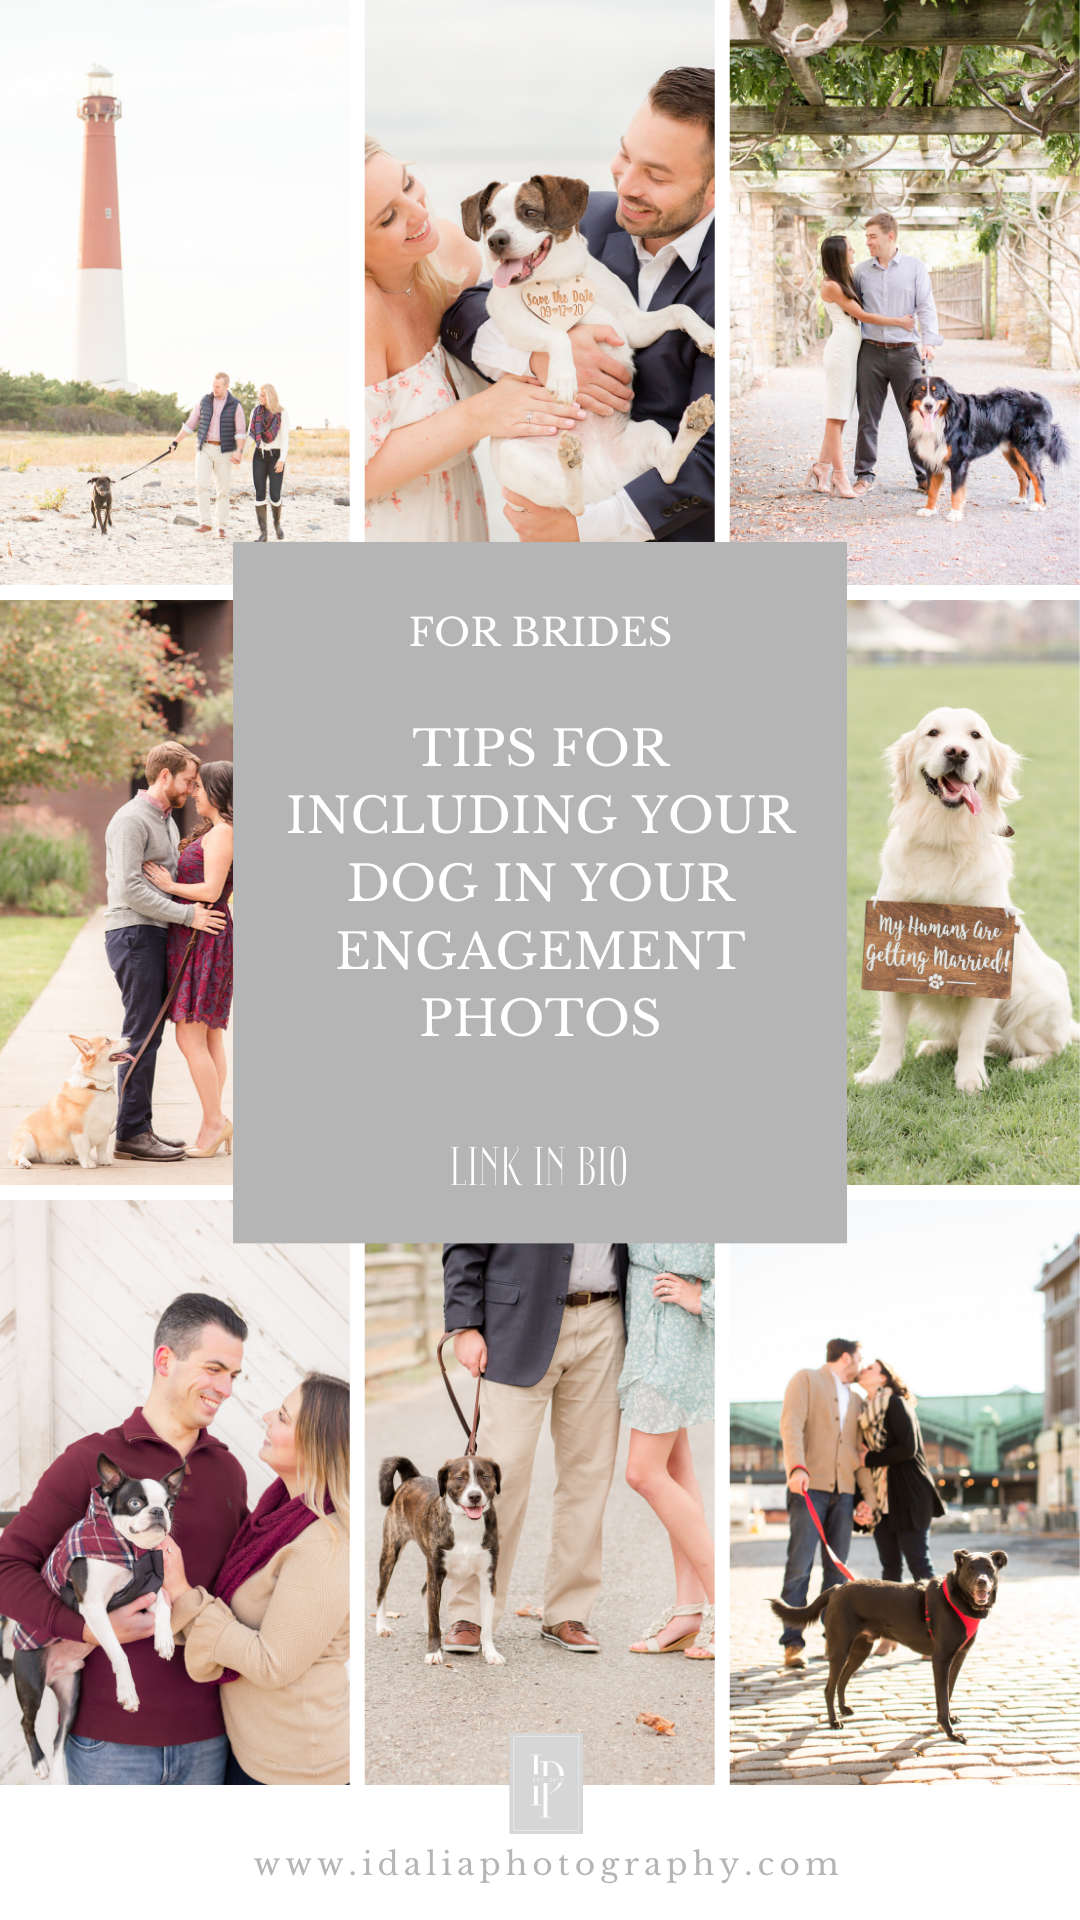 Tips for Including Your Dog in Your Engagement Photos | Photos by Idalia Photography